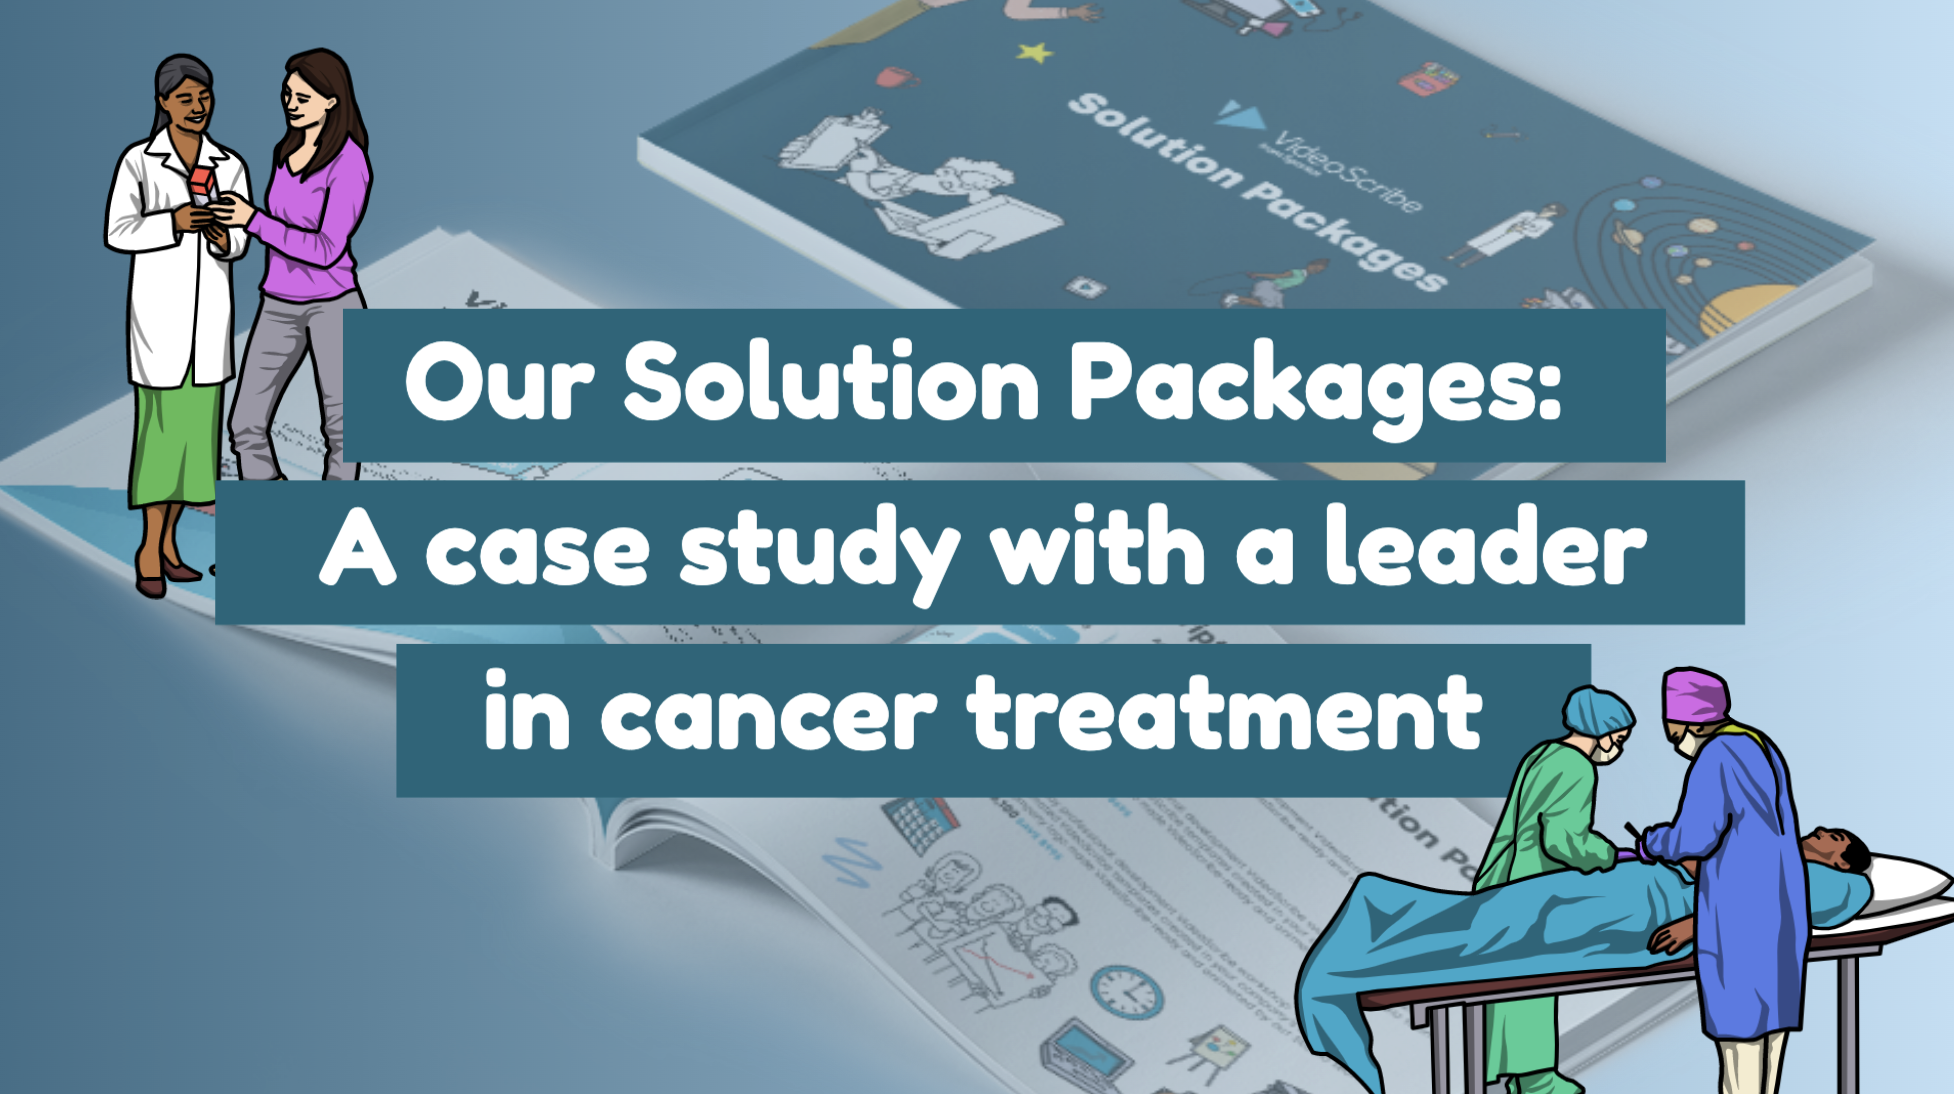 Our Solution Packages: A case study with a leader in cancer treatment